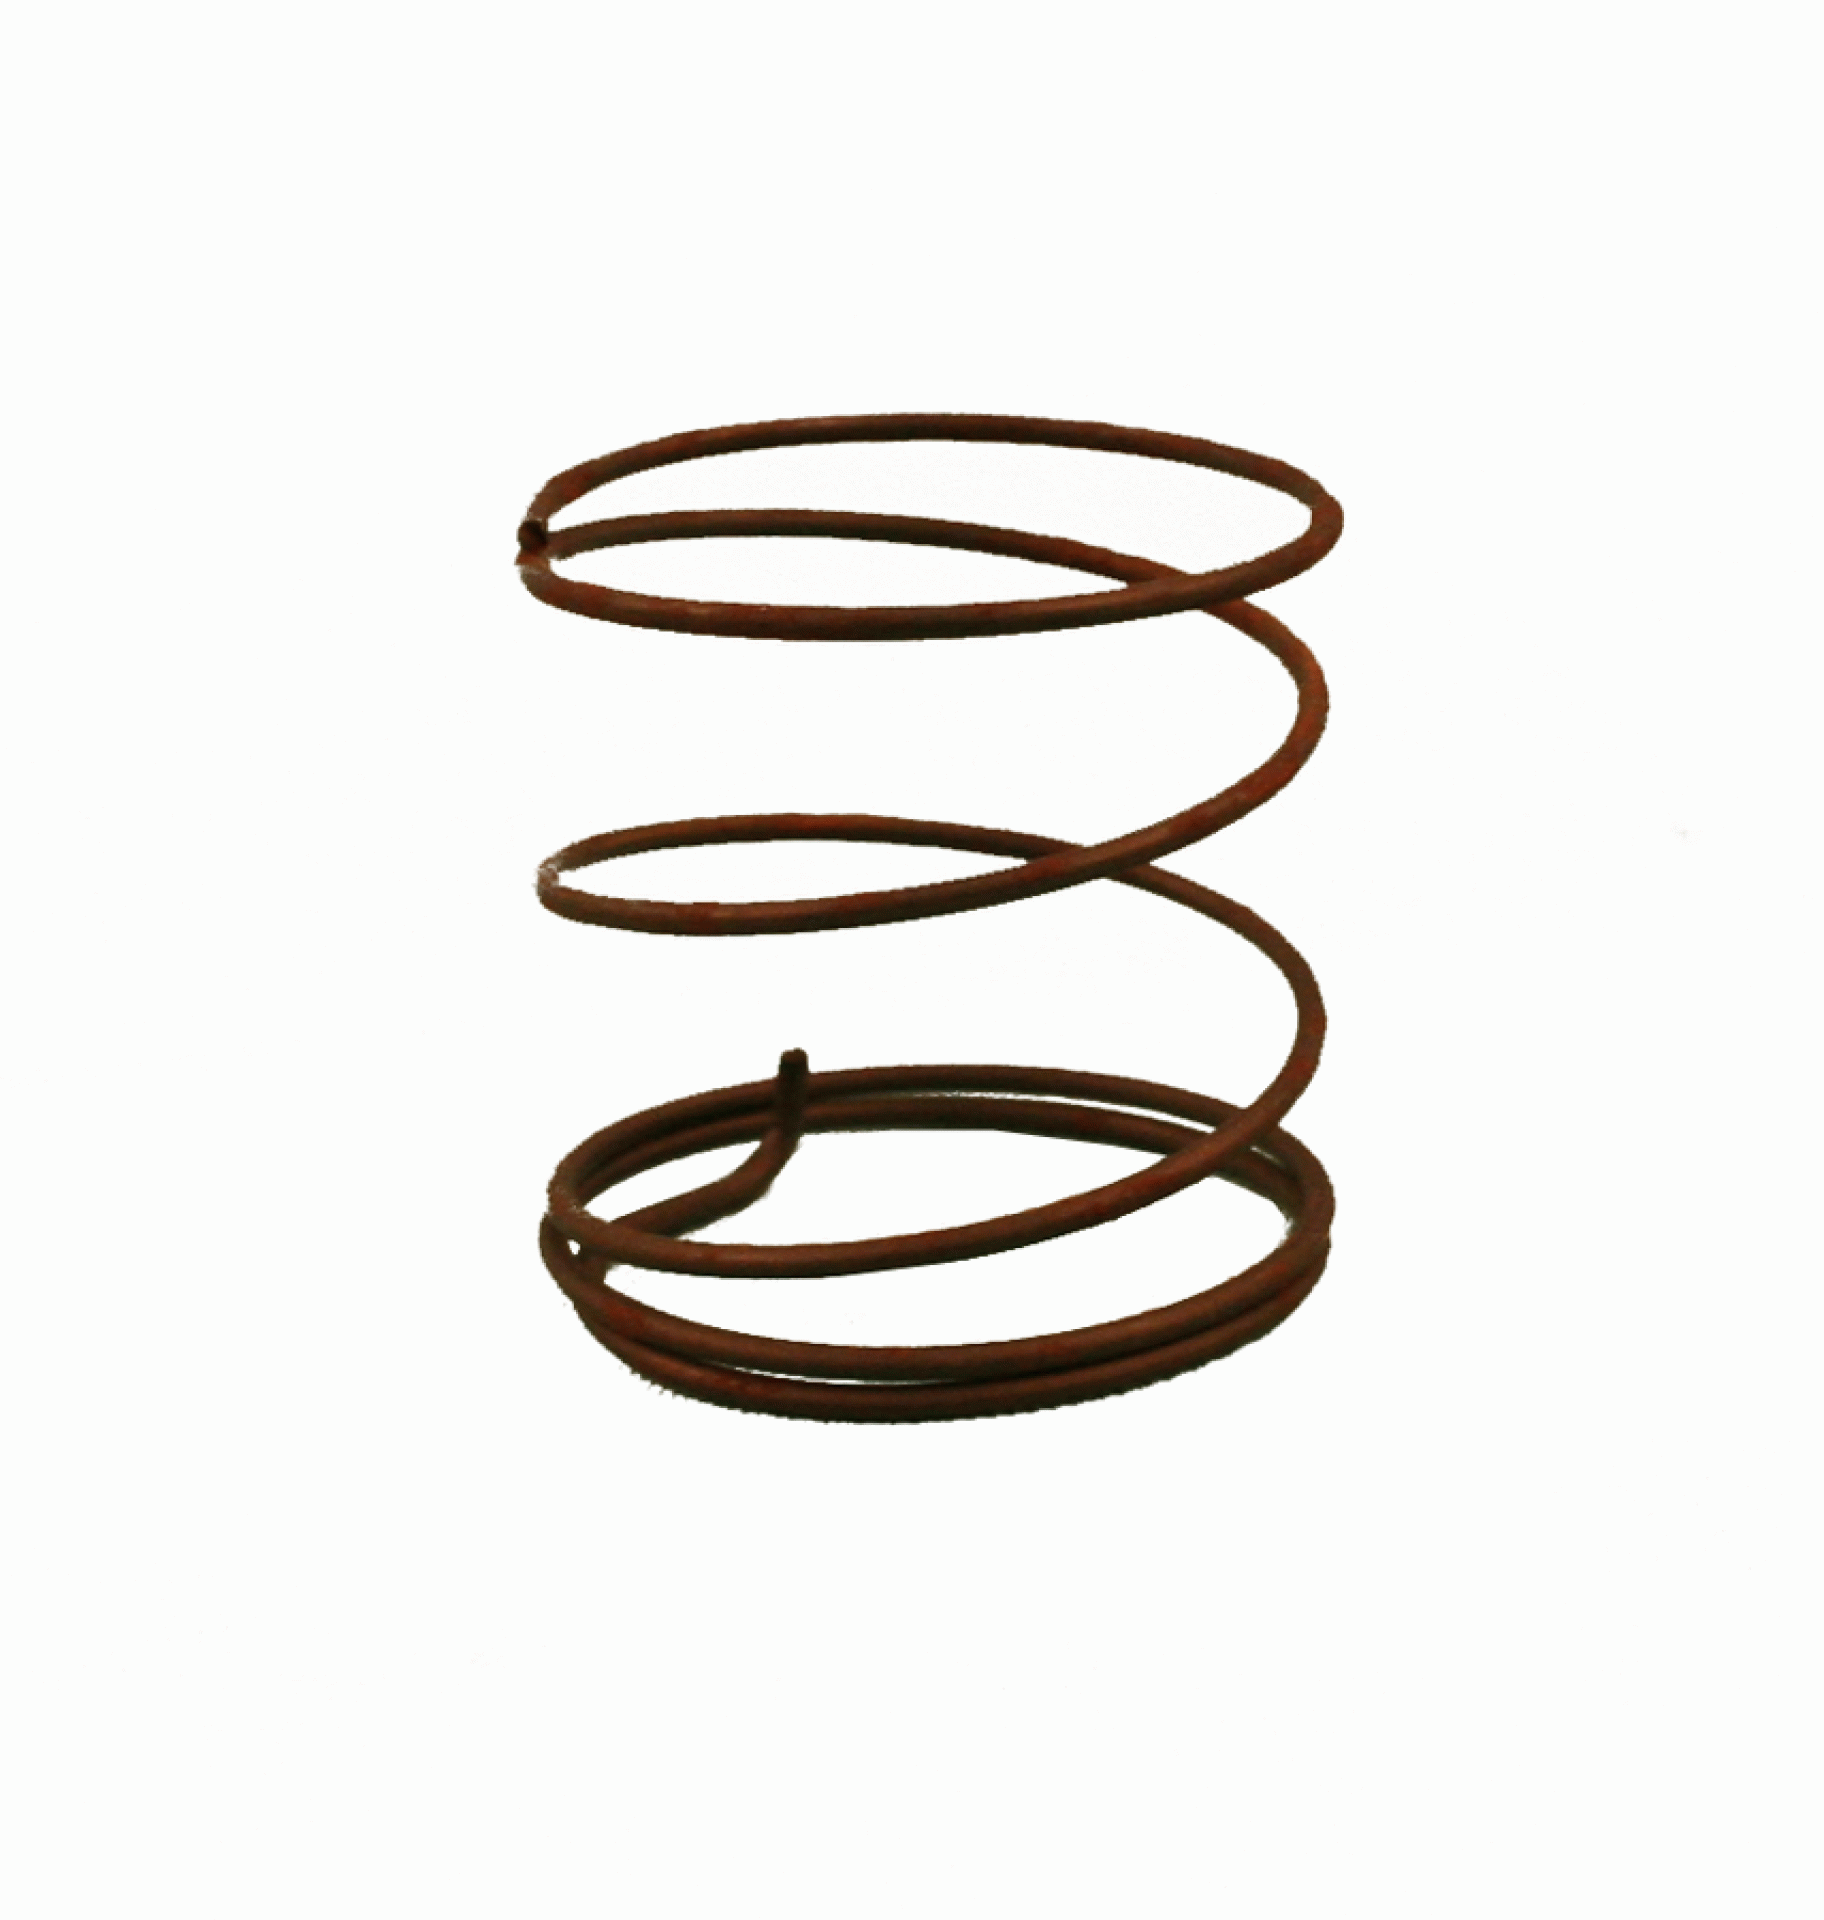 DEXTER AXLE CO. | 046-080-00 | ELECTRIC BRAKE - MAGNET SPRING